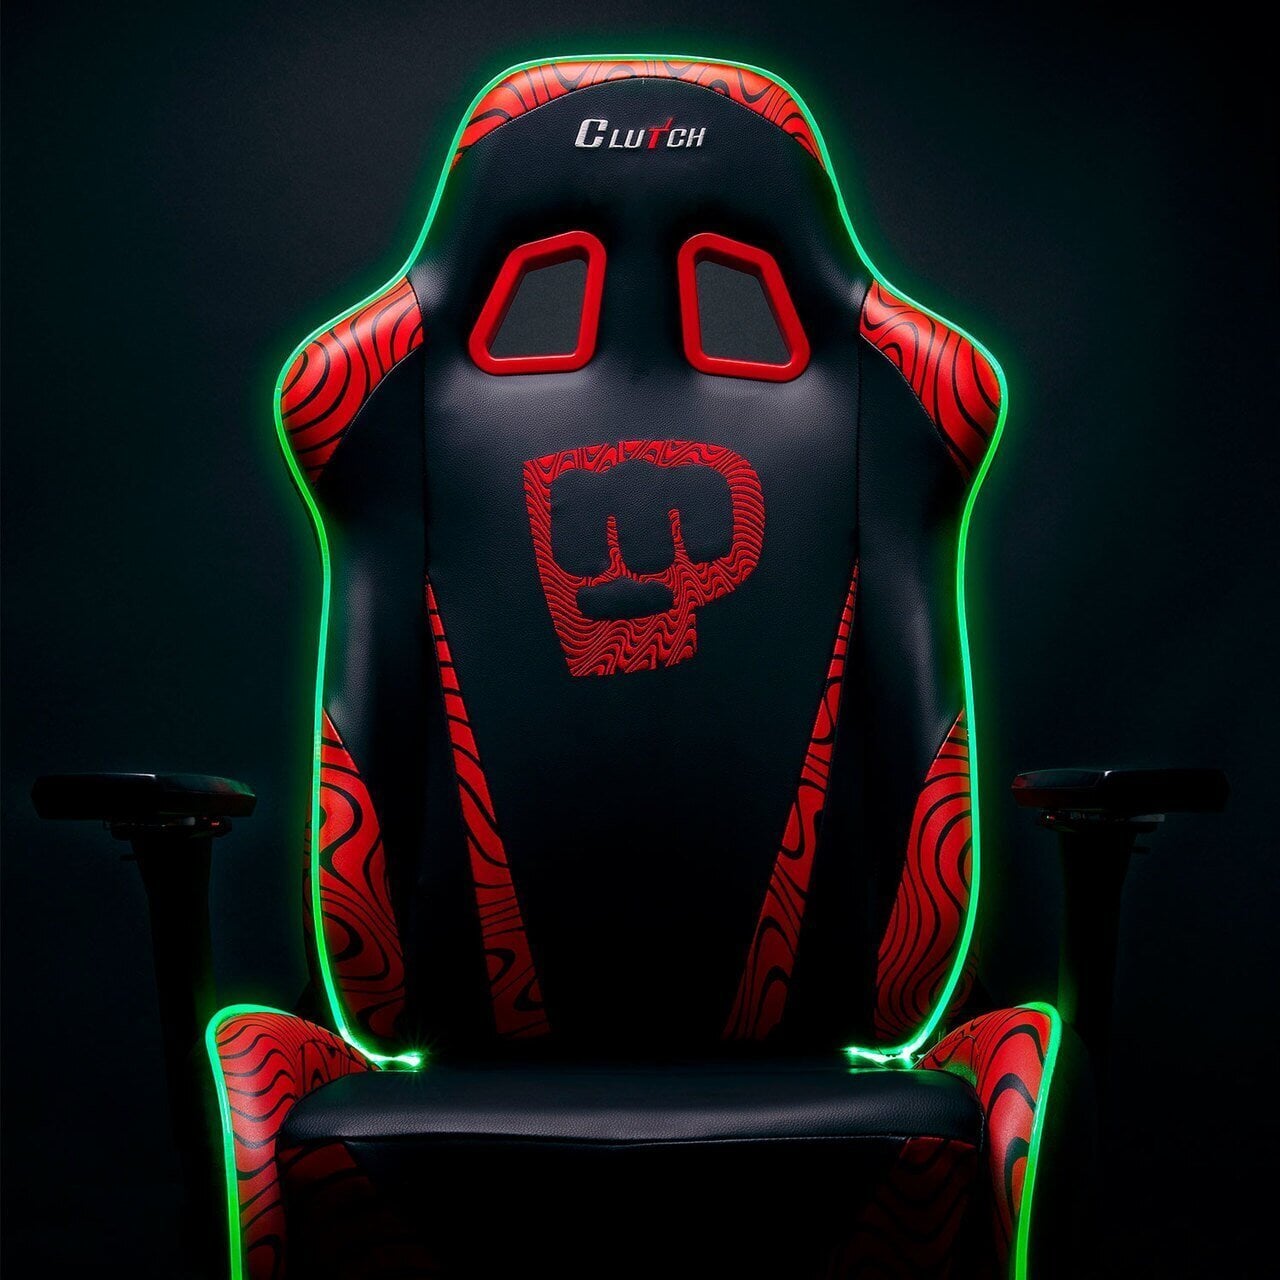 Pewdiepie LED Edition - Throttle Series Gaming Chair Clutch Chairz 